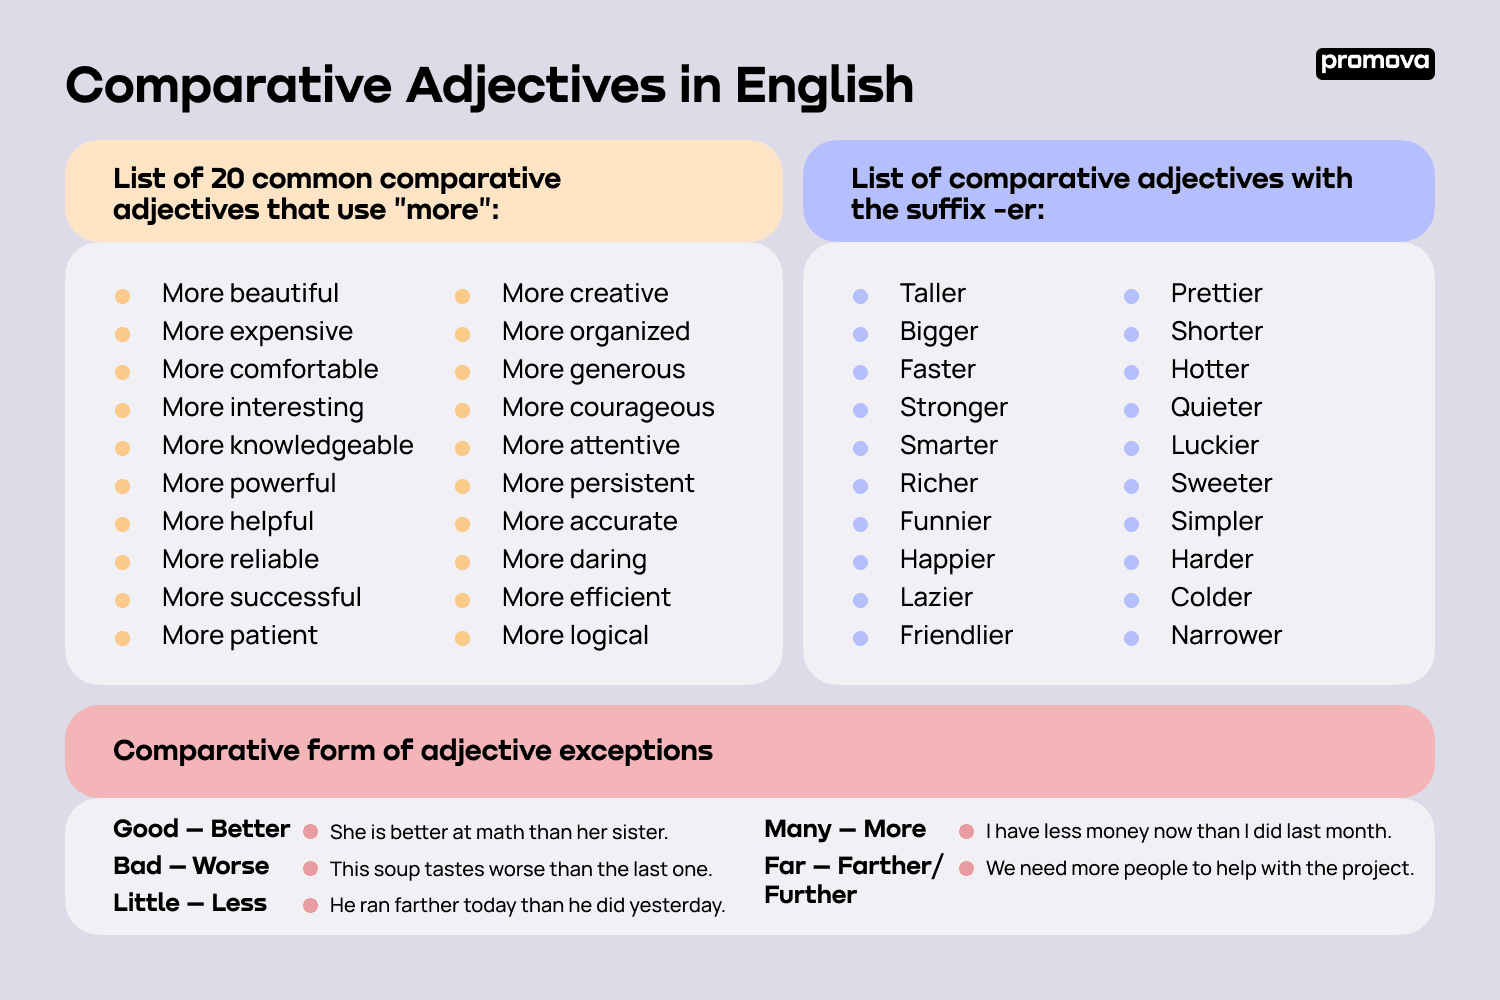 list of Comparative Adjectives